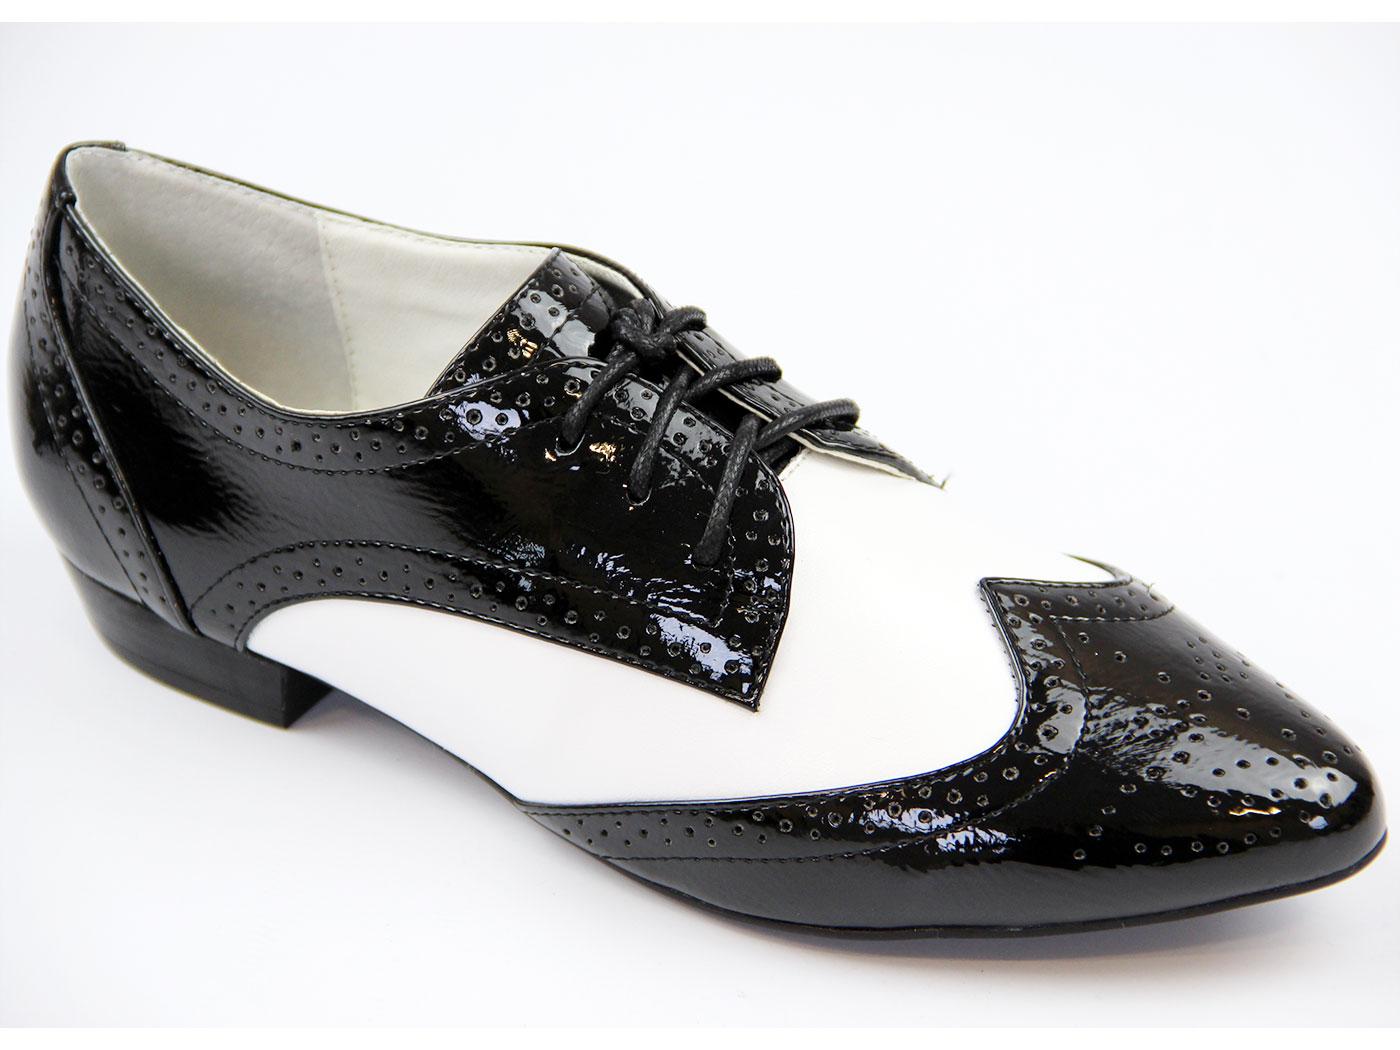 black and white brogues